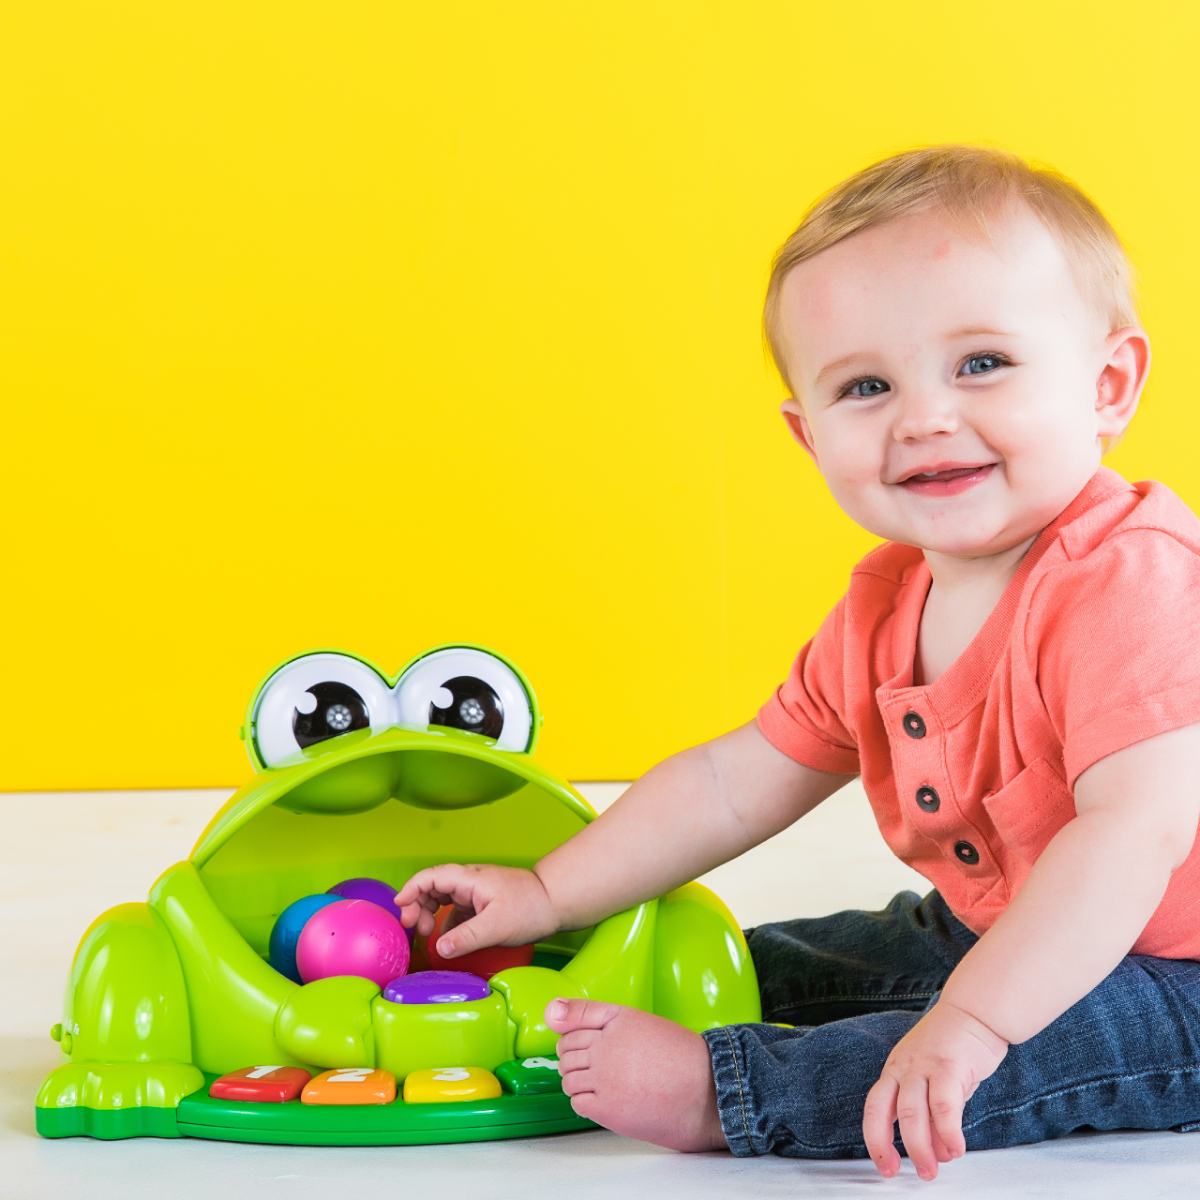 Bright Starts Pop and Giggle Pond Pal Toy